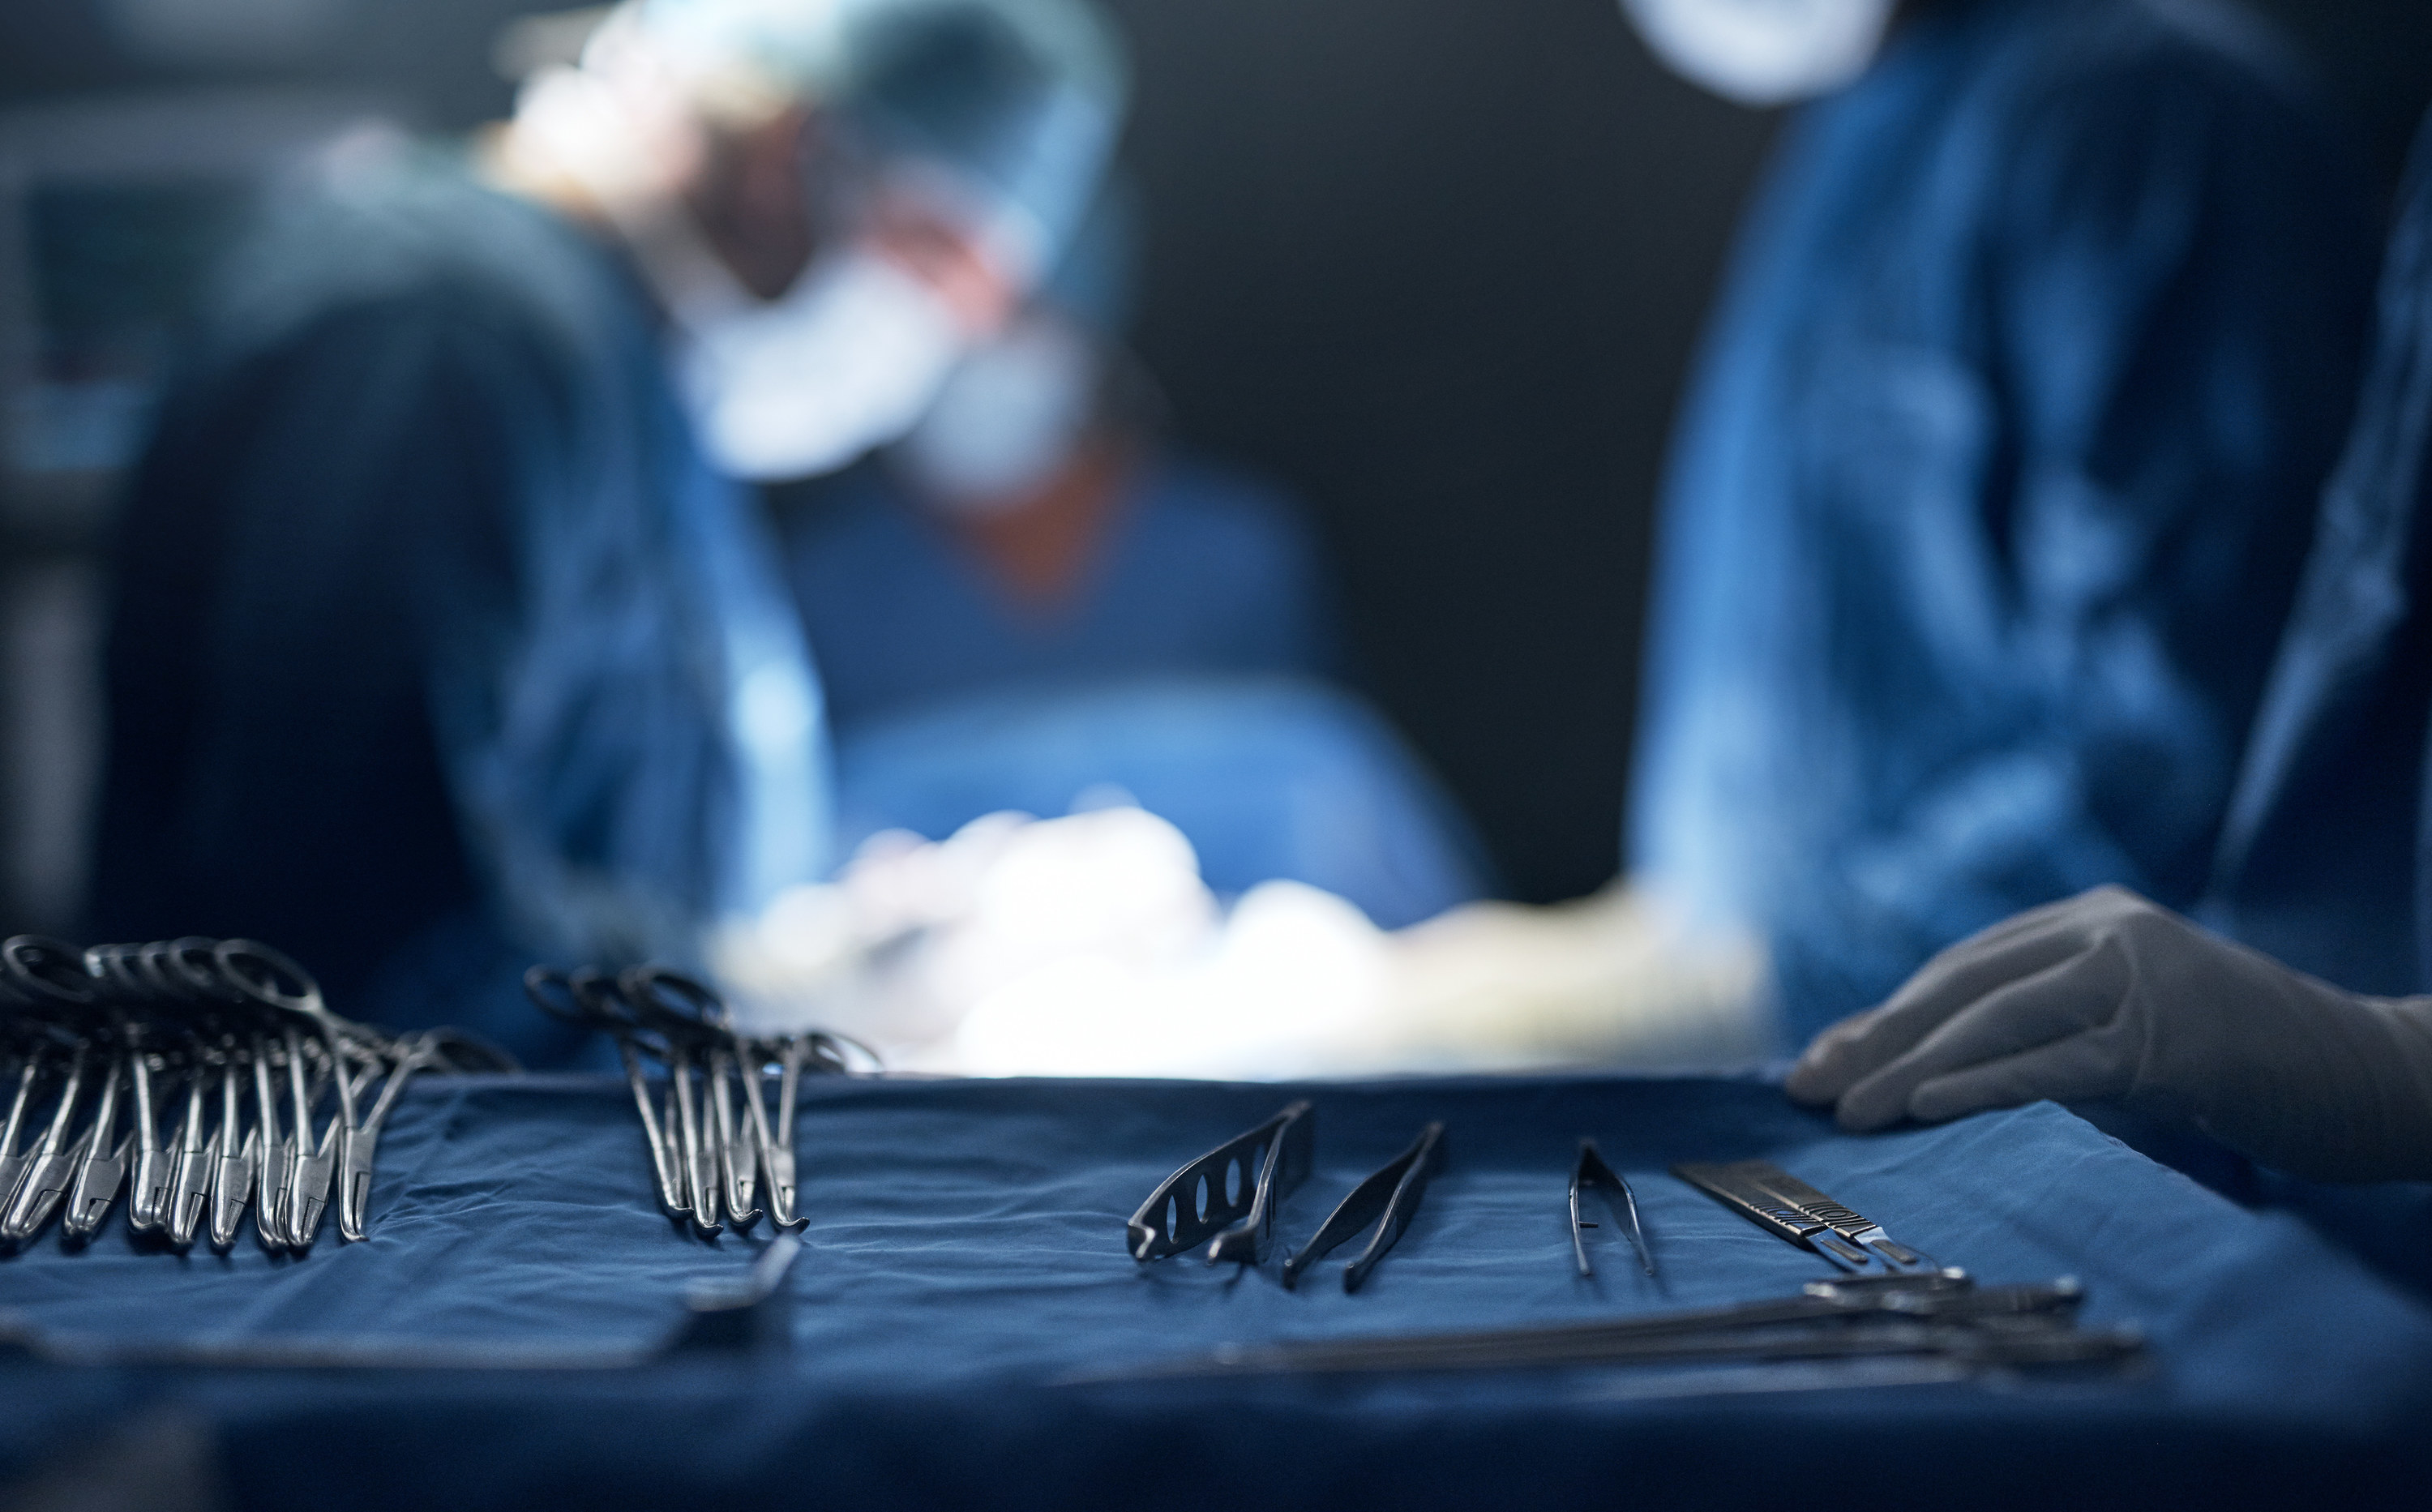 medical tools on tray while surgeon performs surgery